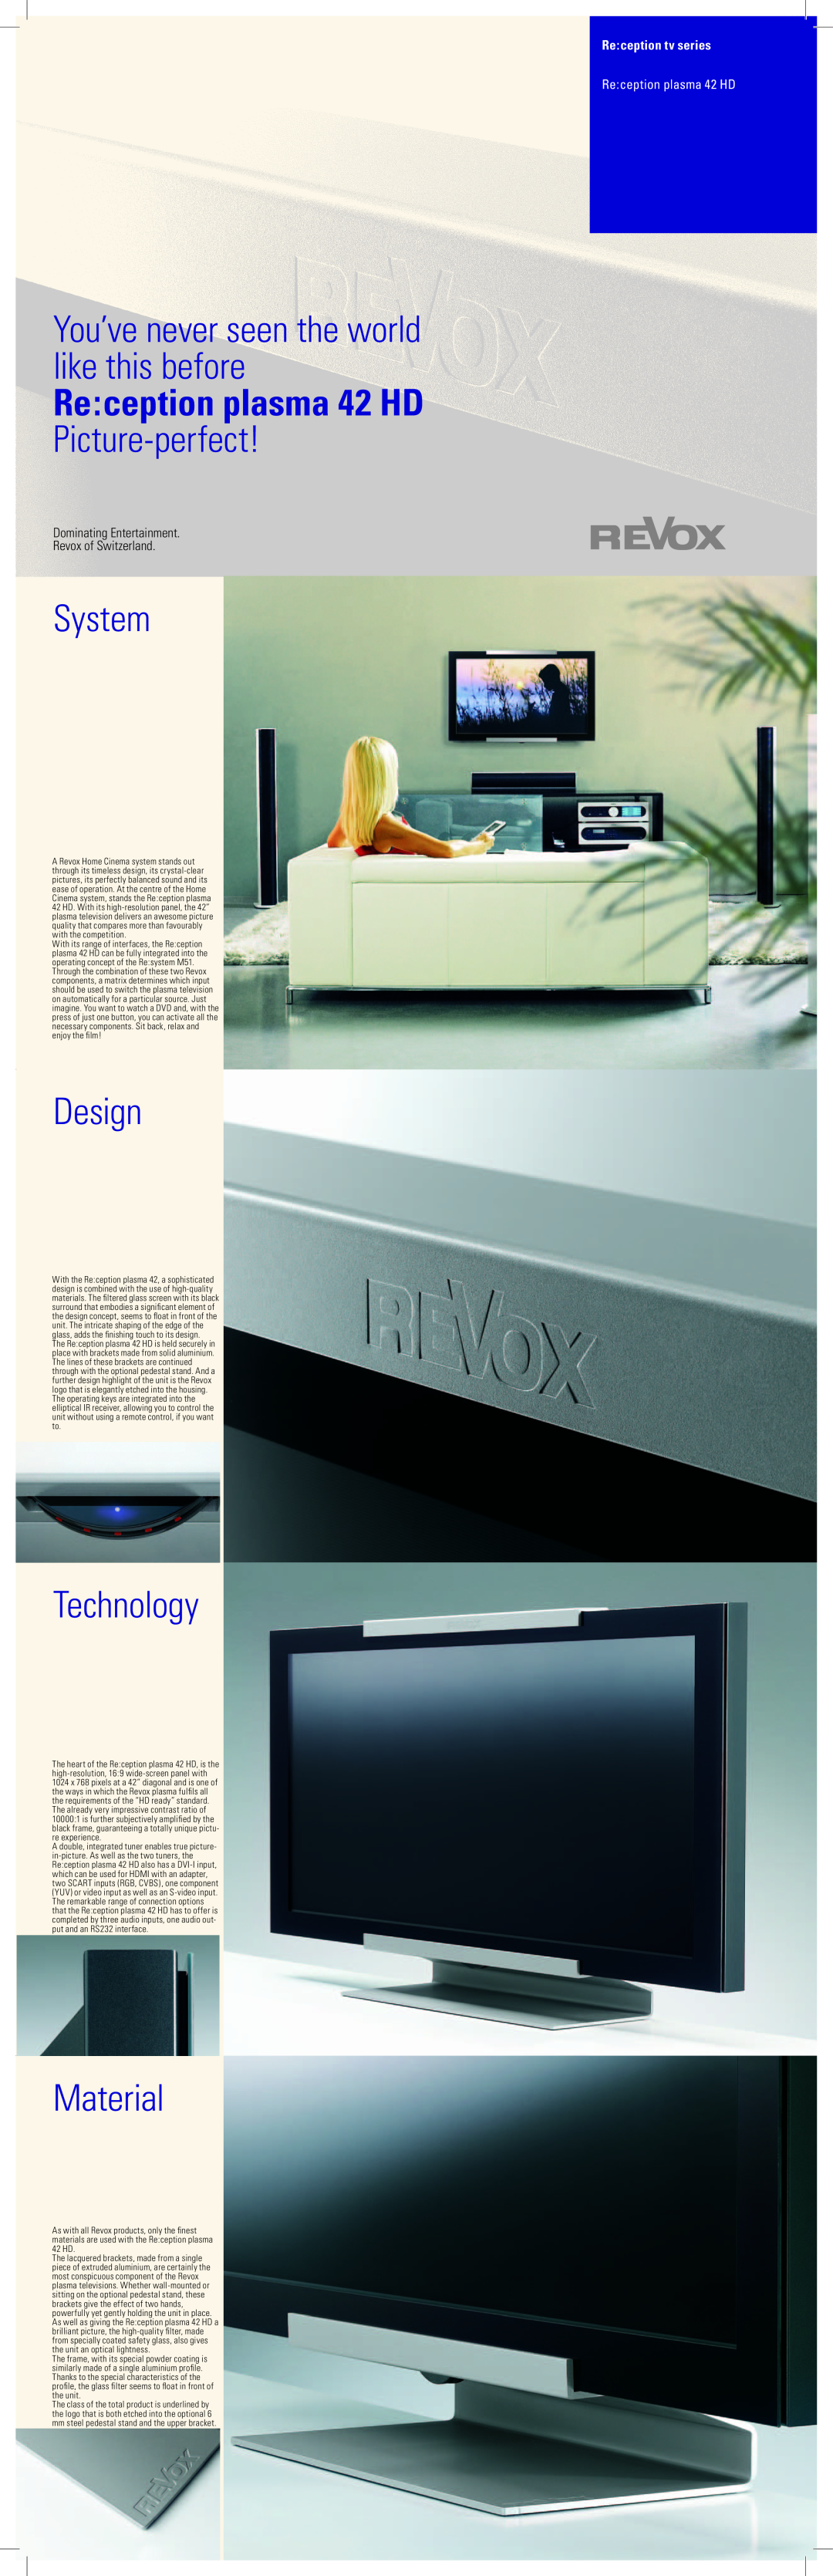 Revox Plasma HD manual You’ve never seen the world like this before, Picture-perfect, System, Design, Technology, Material 